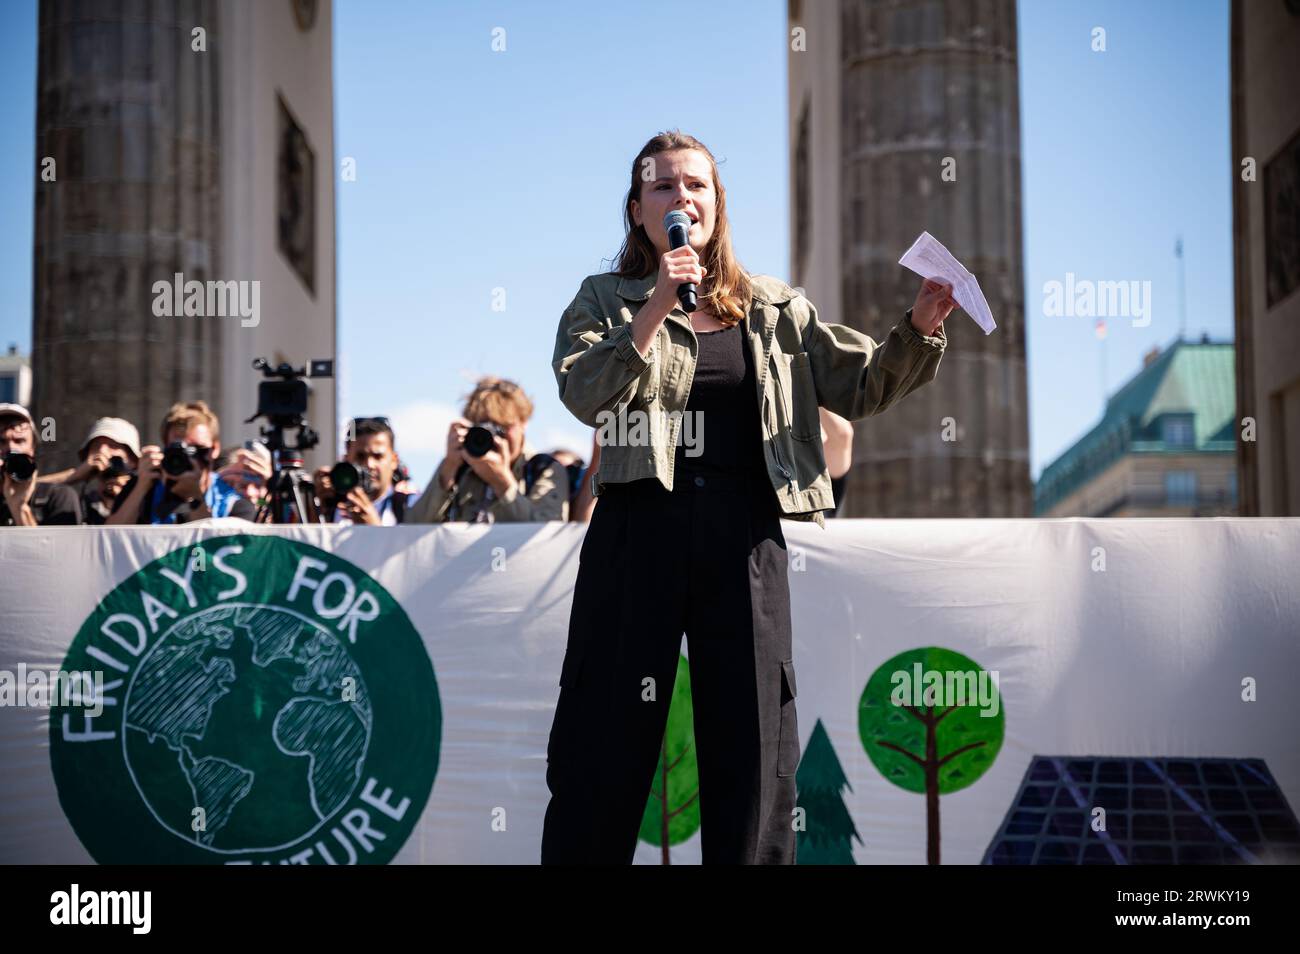 15.09.2023, Berlin, Germany, Europe - German climate protection activist Luisa Neubauer during her speech on stage in front of the Brandenburg Gate. Stock Photo